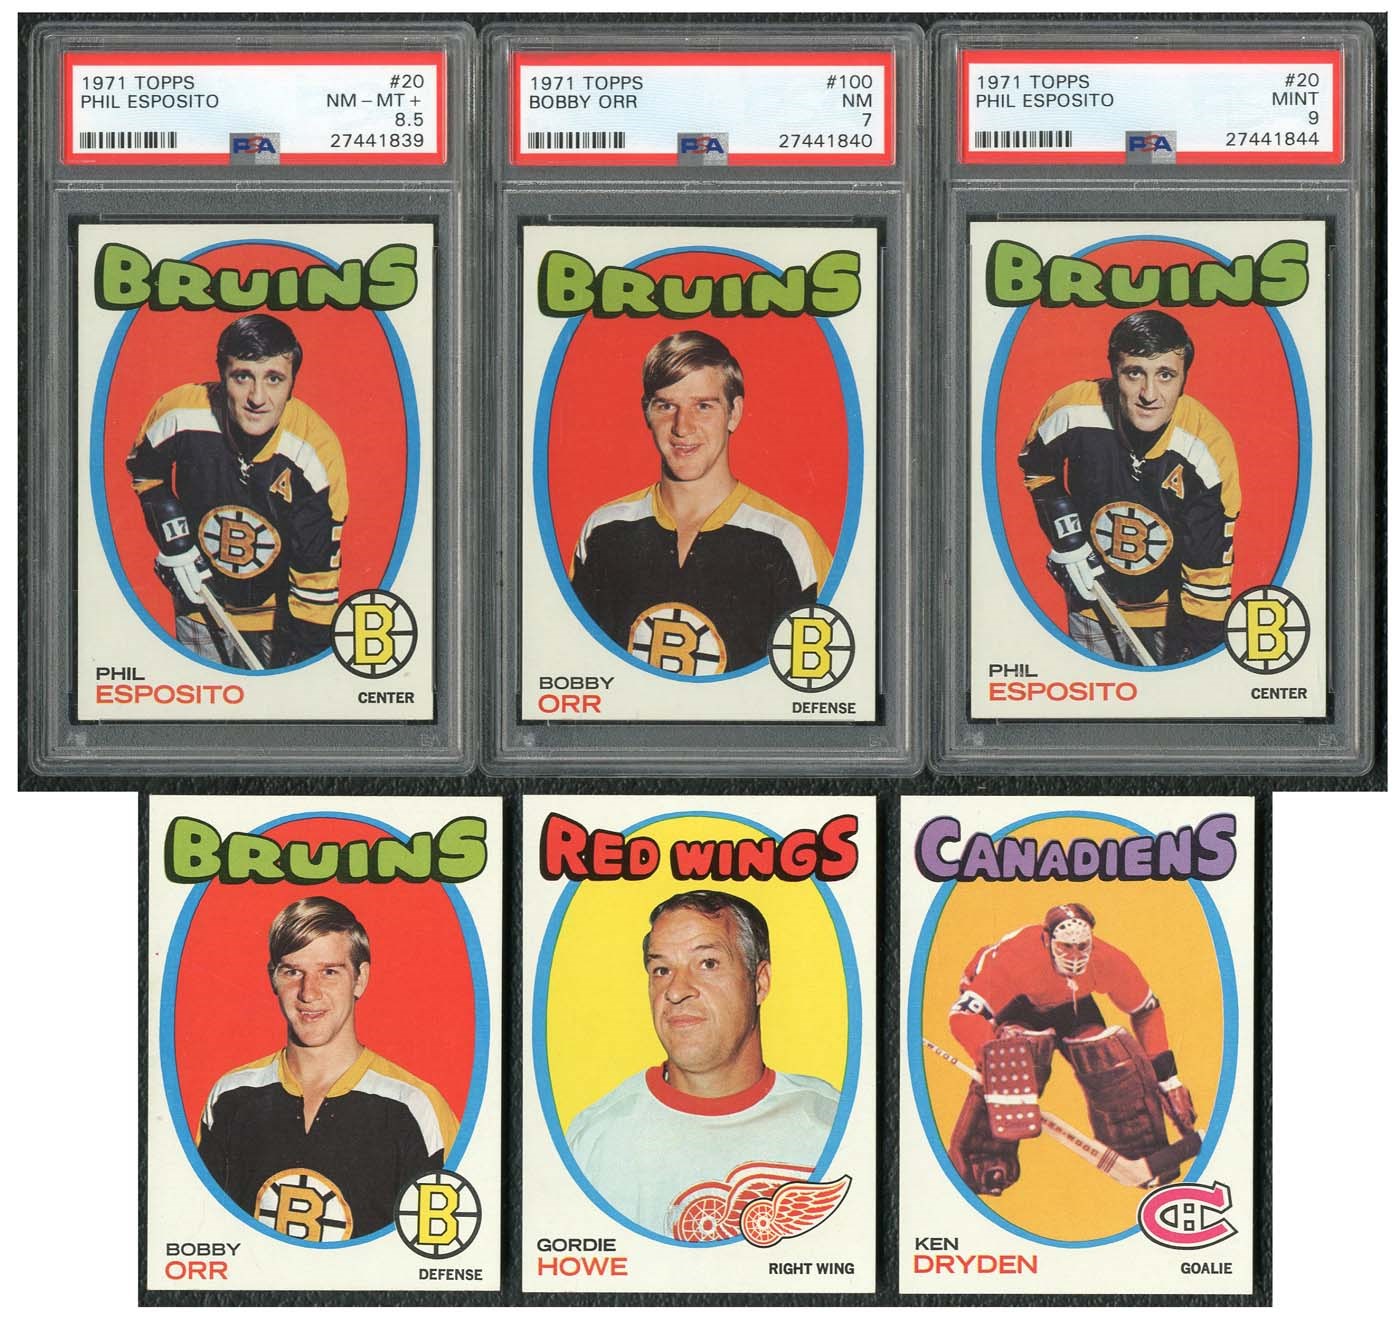 1971-1974 Topps Hockey HIGH GRADE Collection with PSA Graded!